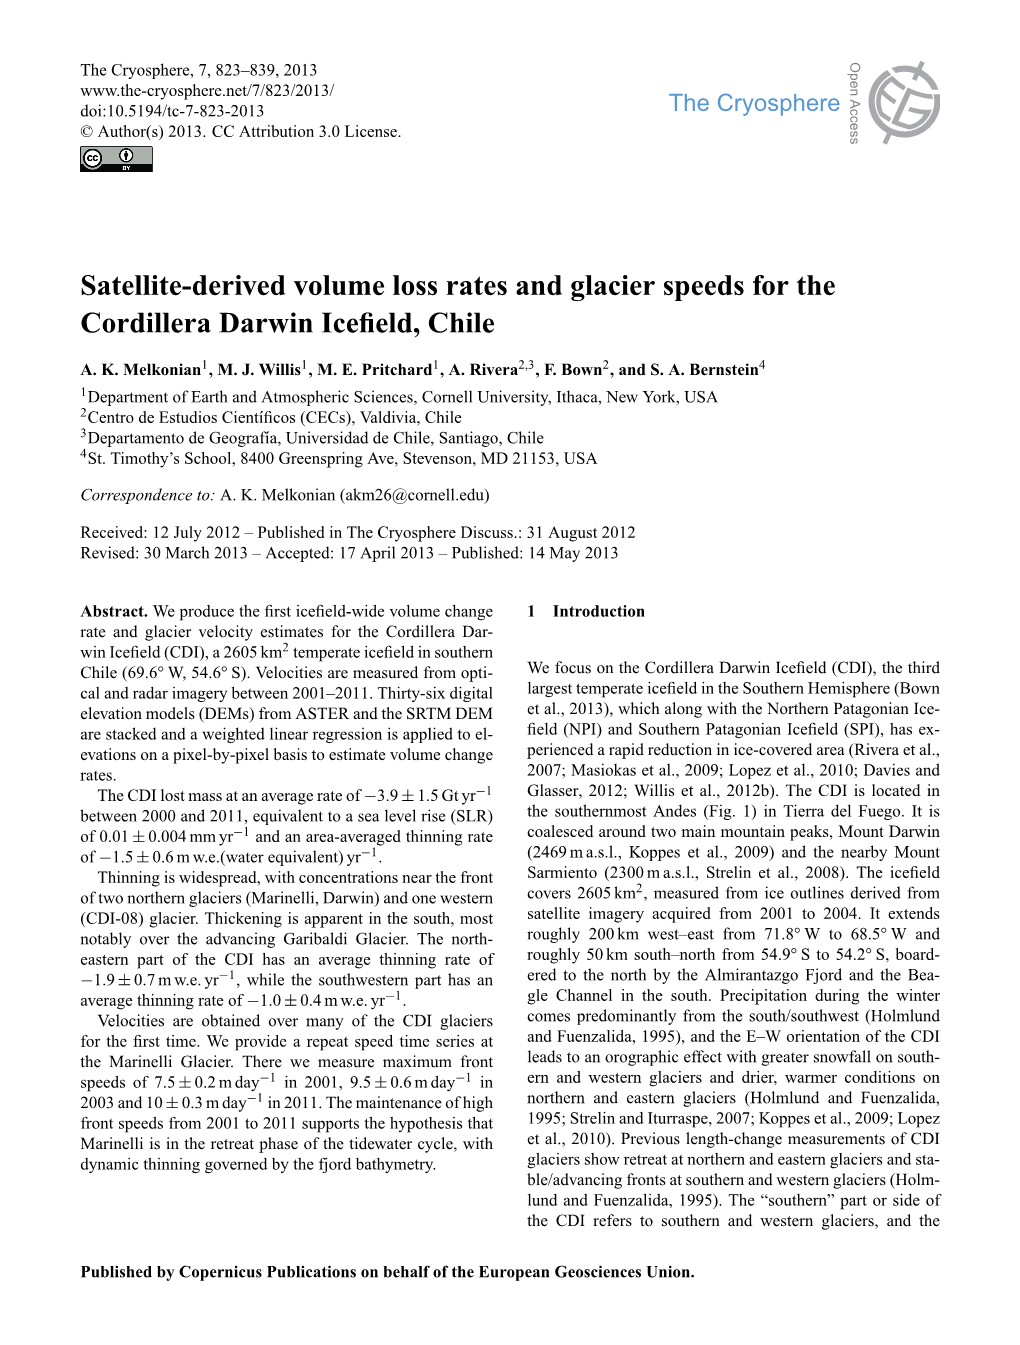 Satellite-Derived Volume Loss Rates and Glacier Speeds for the Cordillera Darwin Iceﬁeld, Chile